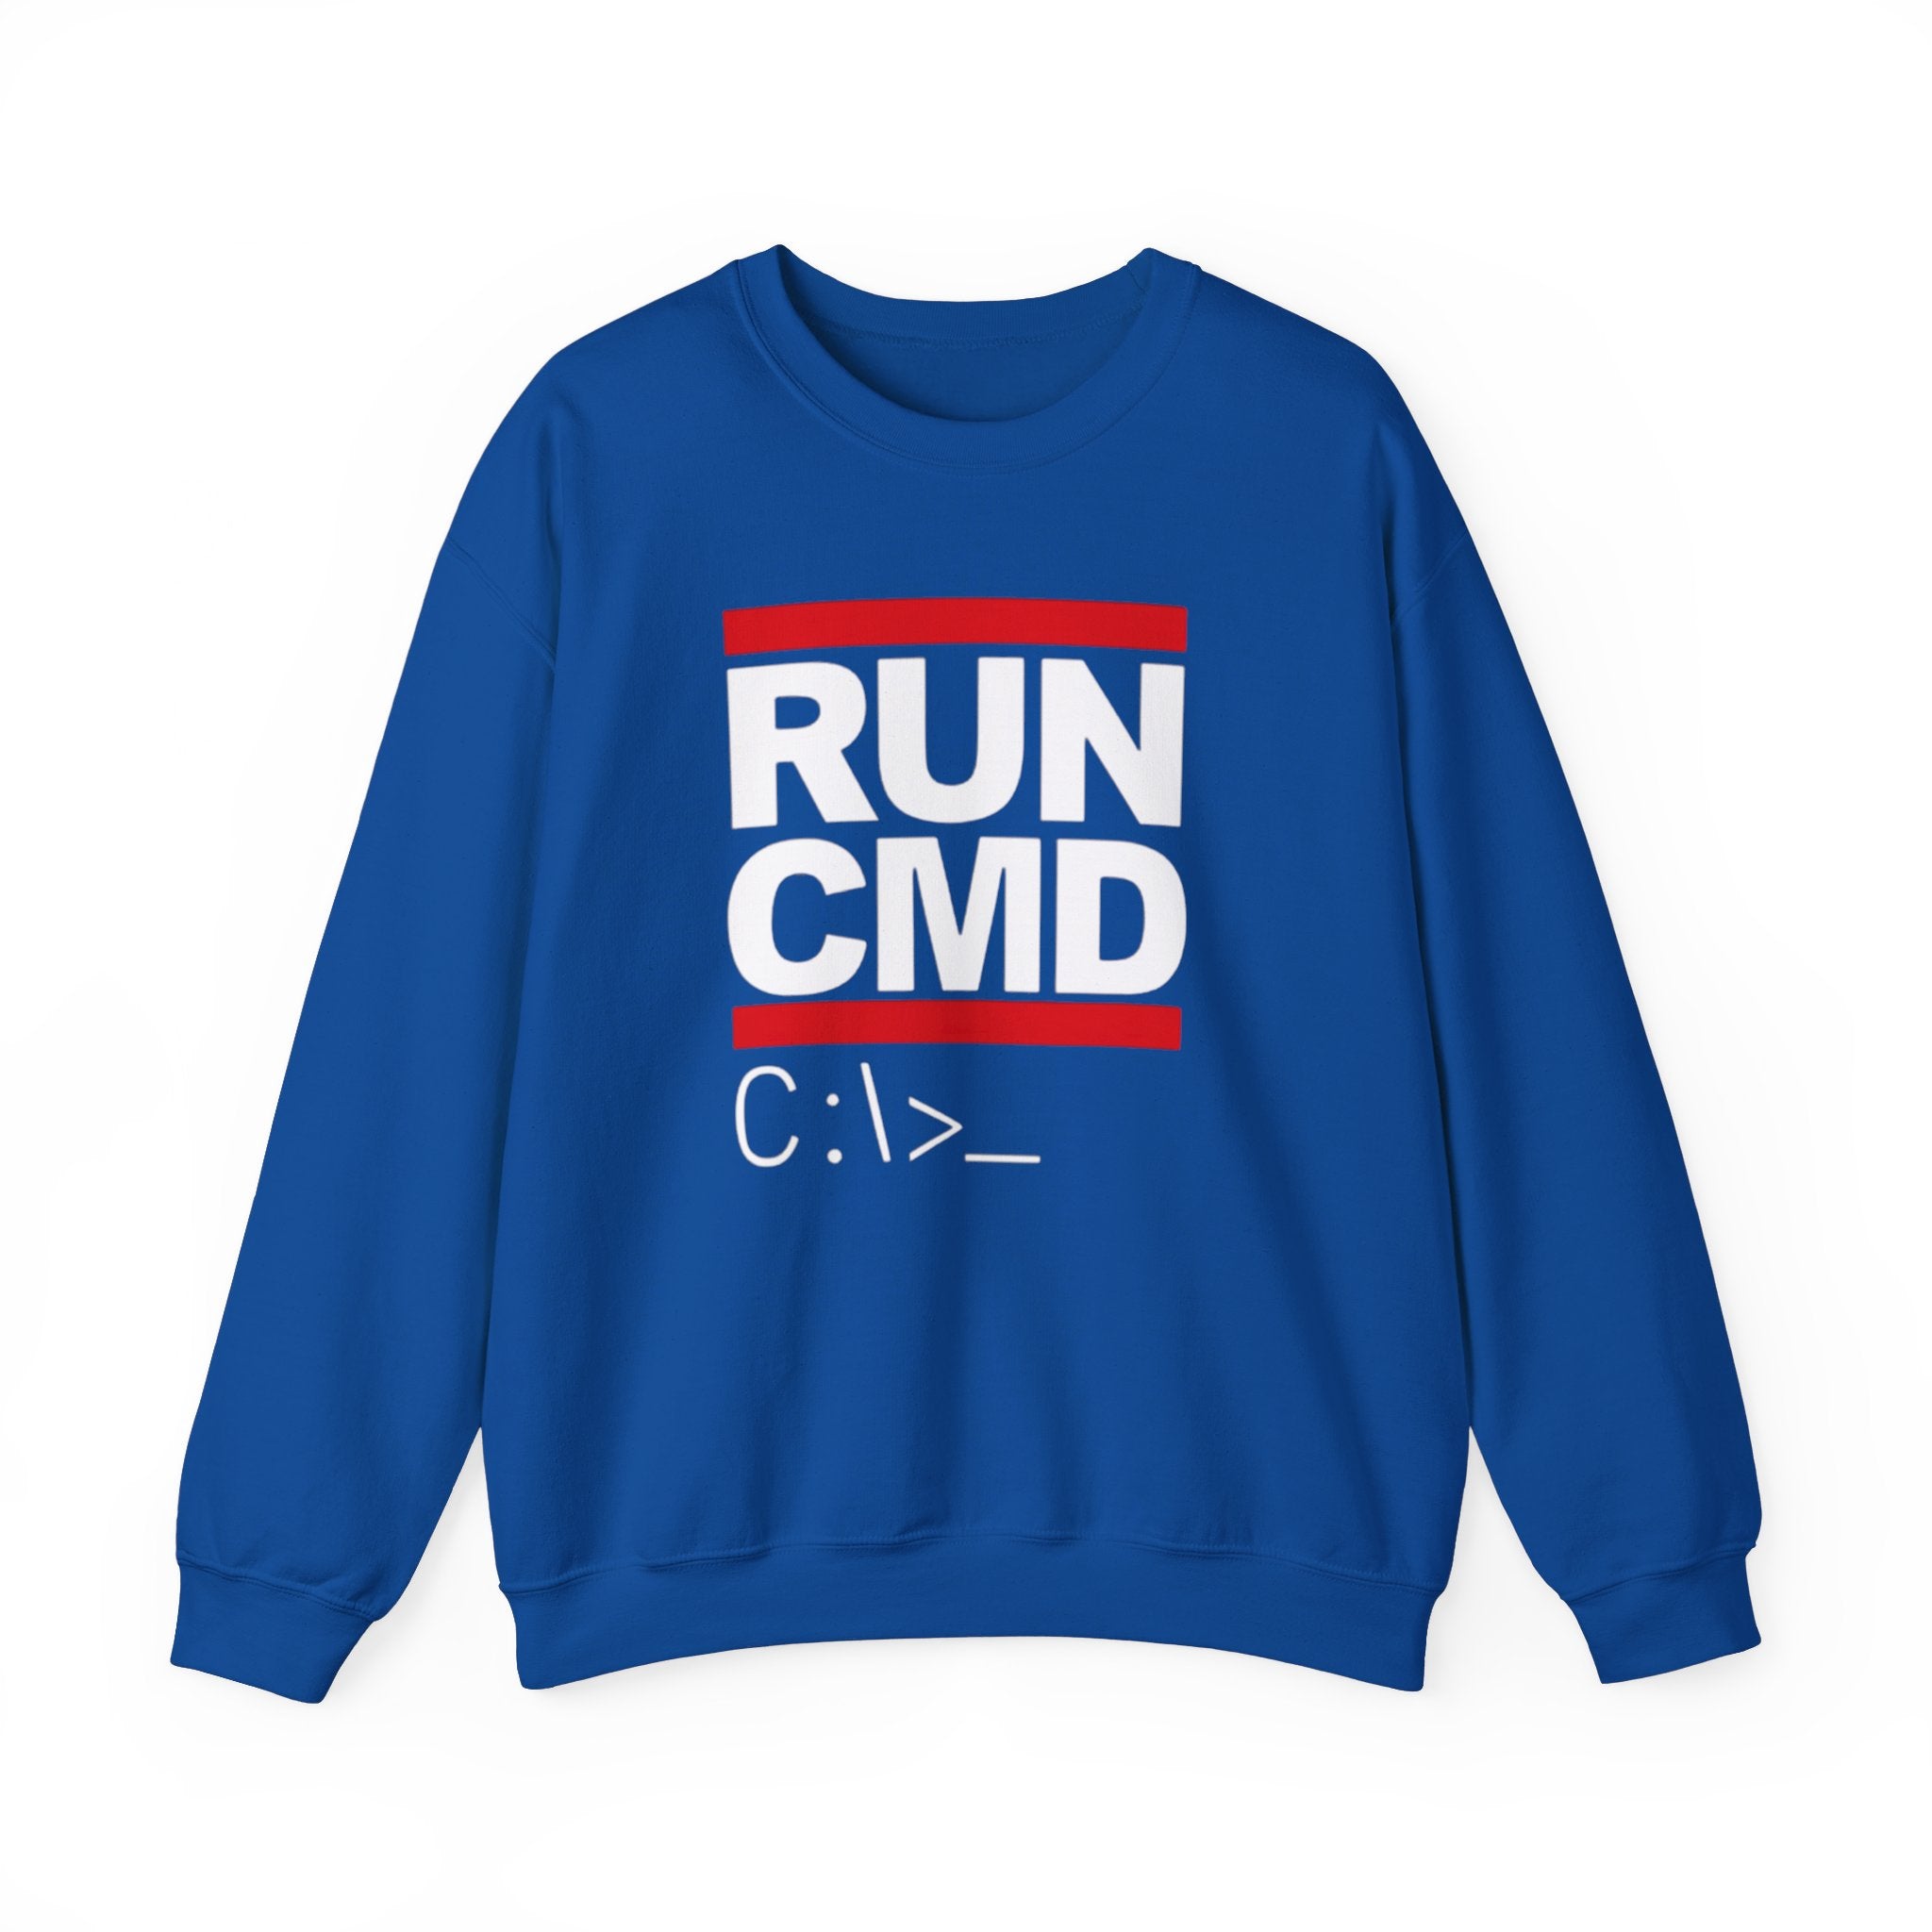 RUN CMD - Sweatshirt: Comfortable blue sweatshirt with the text "RUN CMD" in bold white letters inside a red and white box, and "C:/>_" printed below in smaller white font.